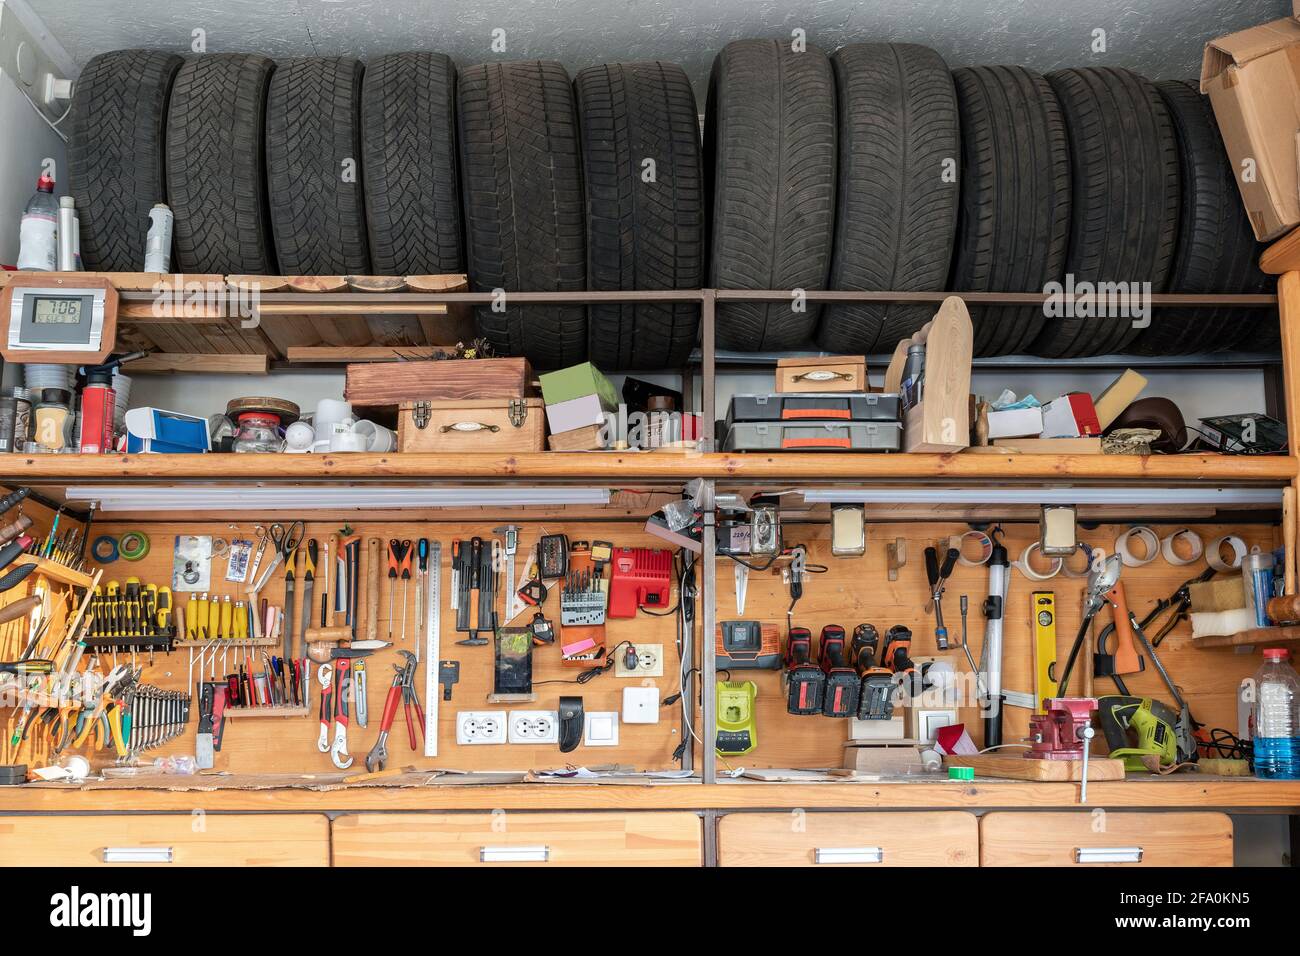 Home suburban garage interior big wooden workbench with lot of power mechanic tools at background. Spare season wheels storage shelf rack ceiling Stock Photo